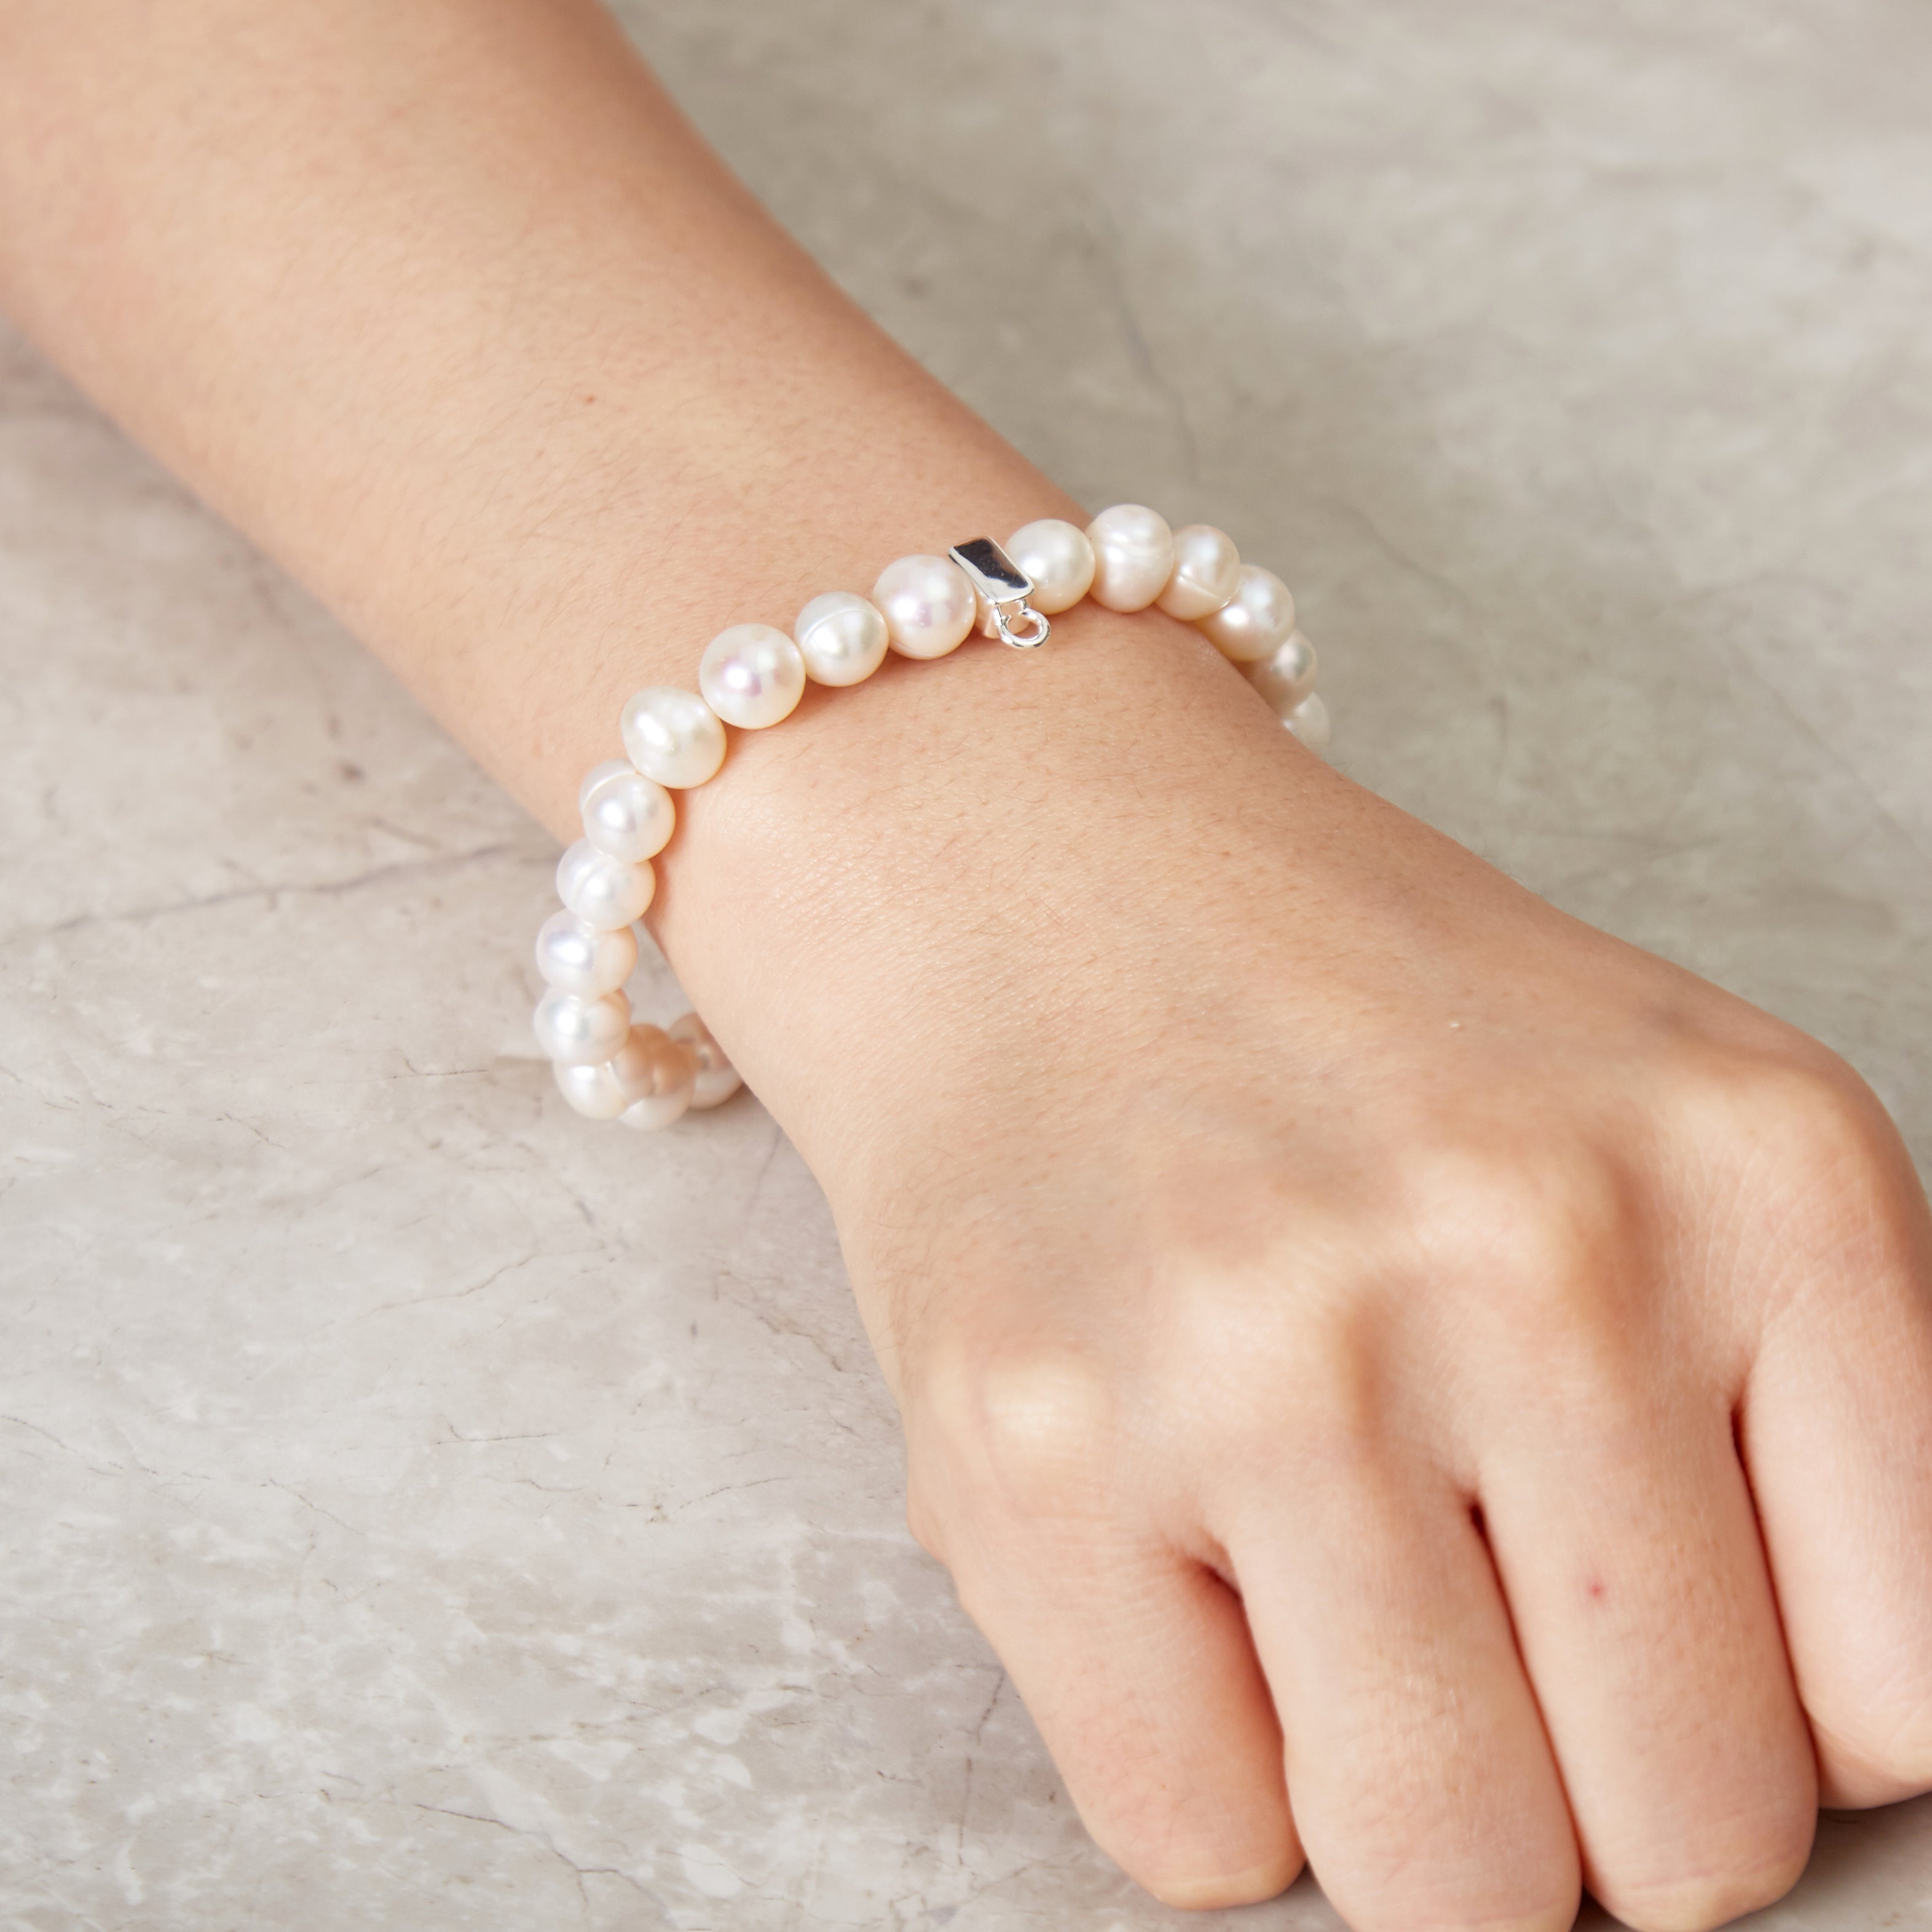 Freshwater Baroque Pearl Bracelet with Charm Created with Zircondia® Crystals